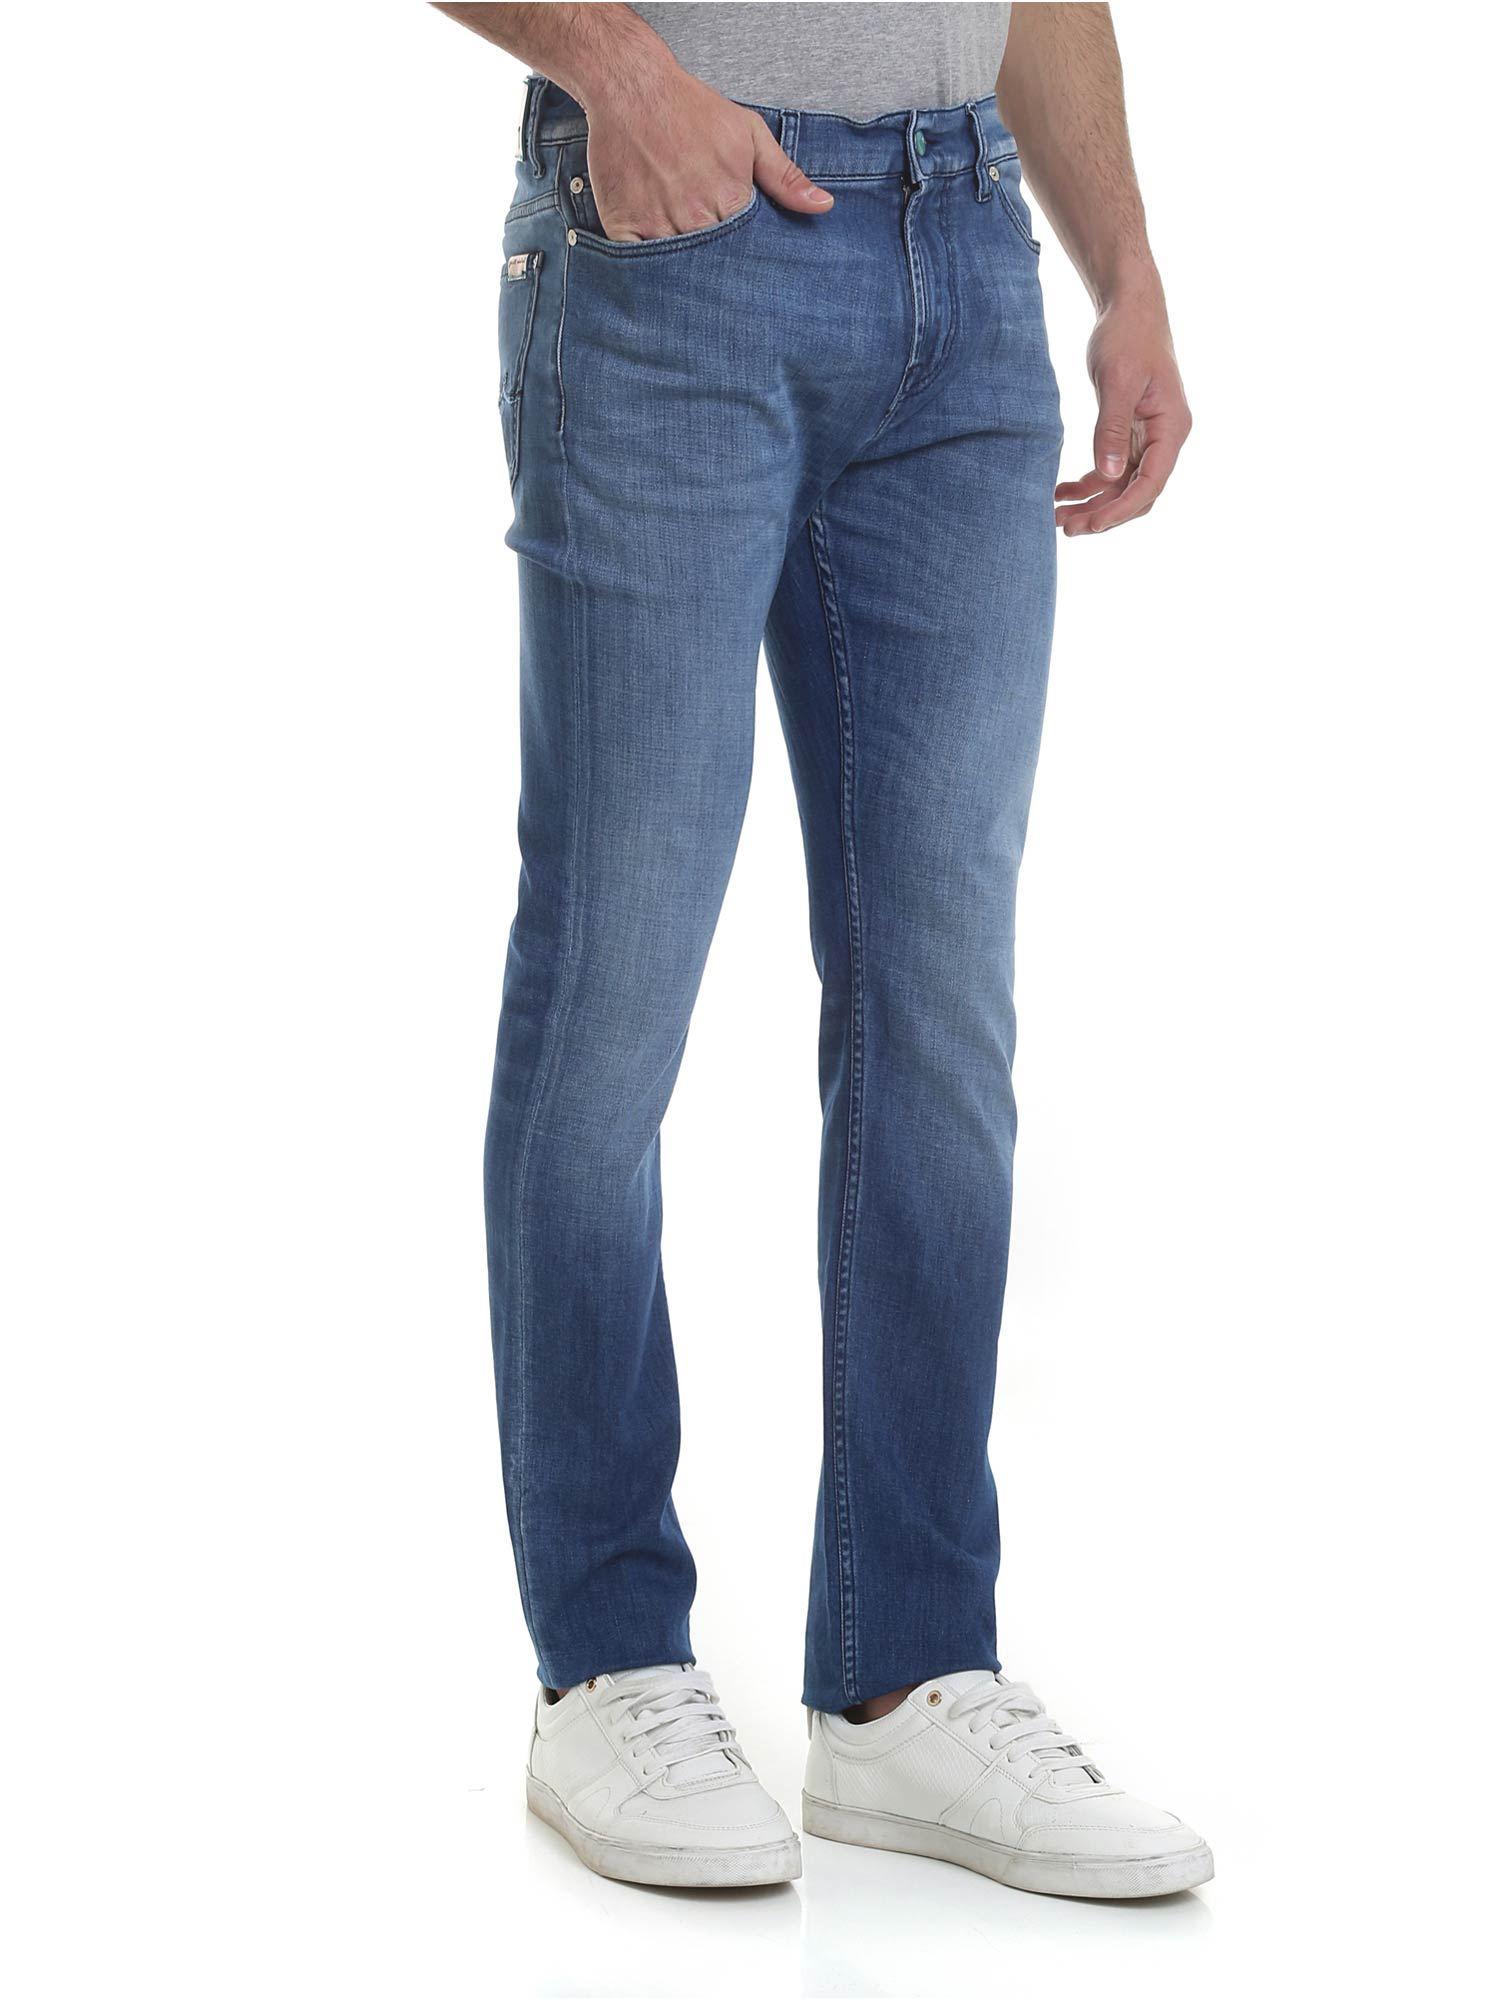 7 For All Mankind Denim Ronnie Jeans In Blue for Men - Lyst